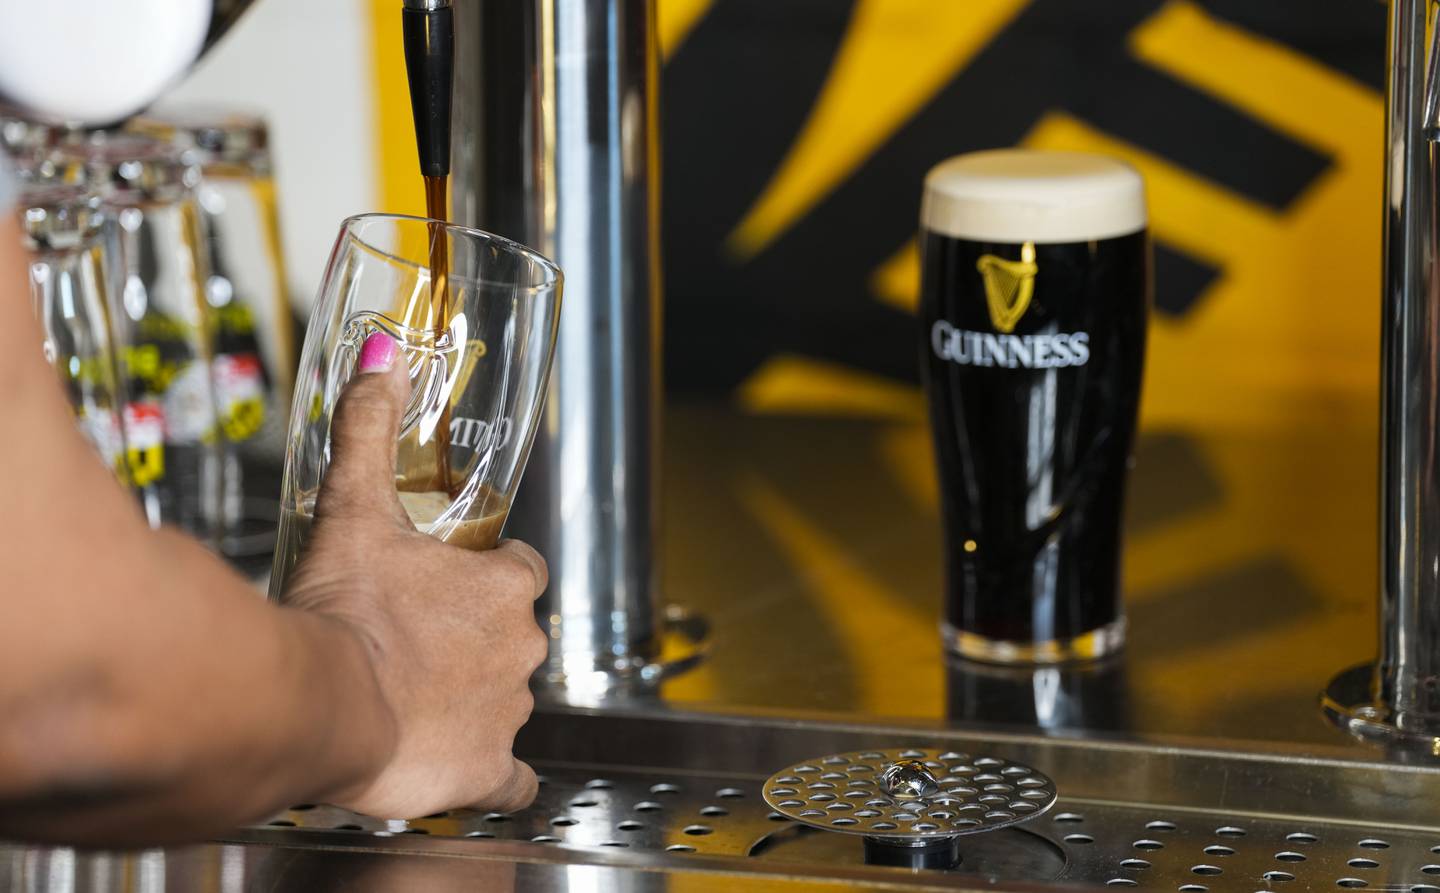 Baltimore Banner columnist Leslie Streeter learns from Oliver Gray how to craft the "perfect pour" of a Guinness draft at the Baltimore Guinness location on March 14, 2023.